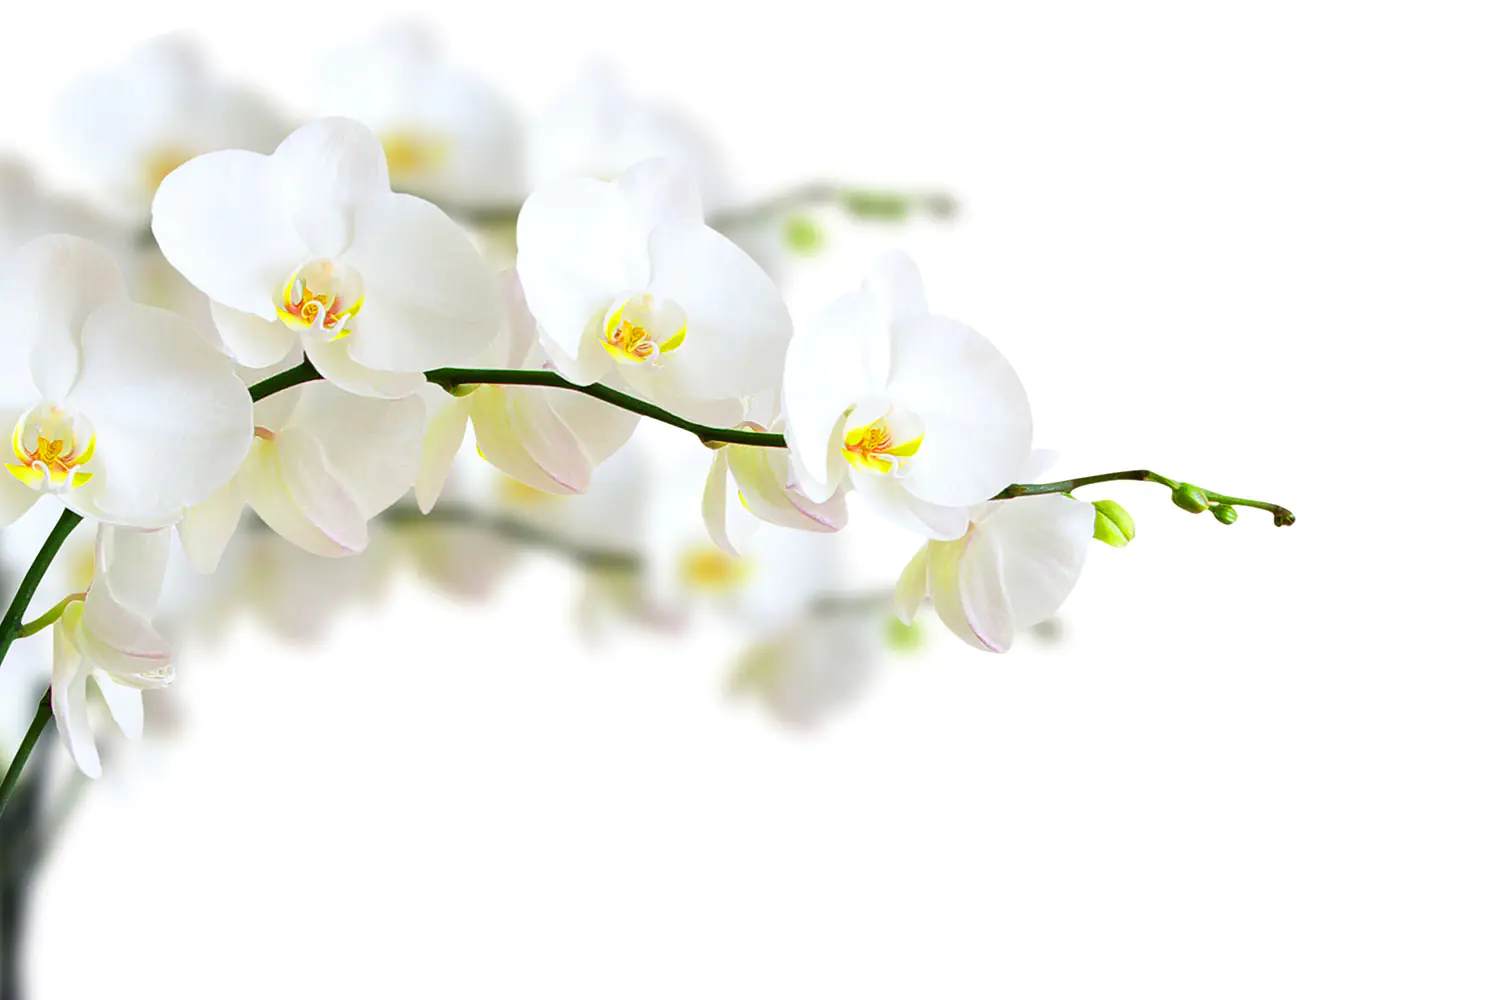 Wall Mural Photo Wallpaper White Orchids